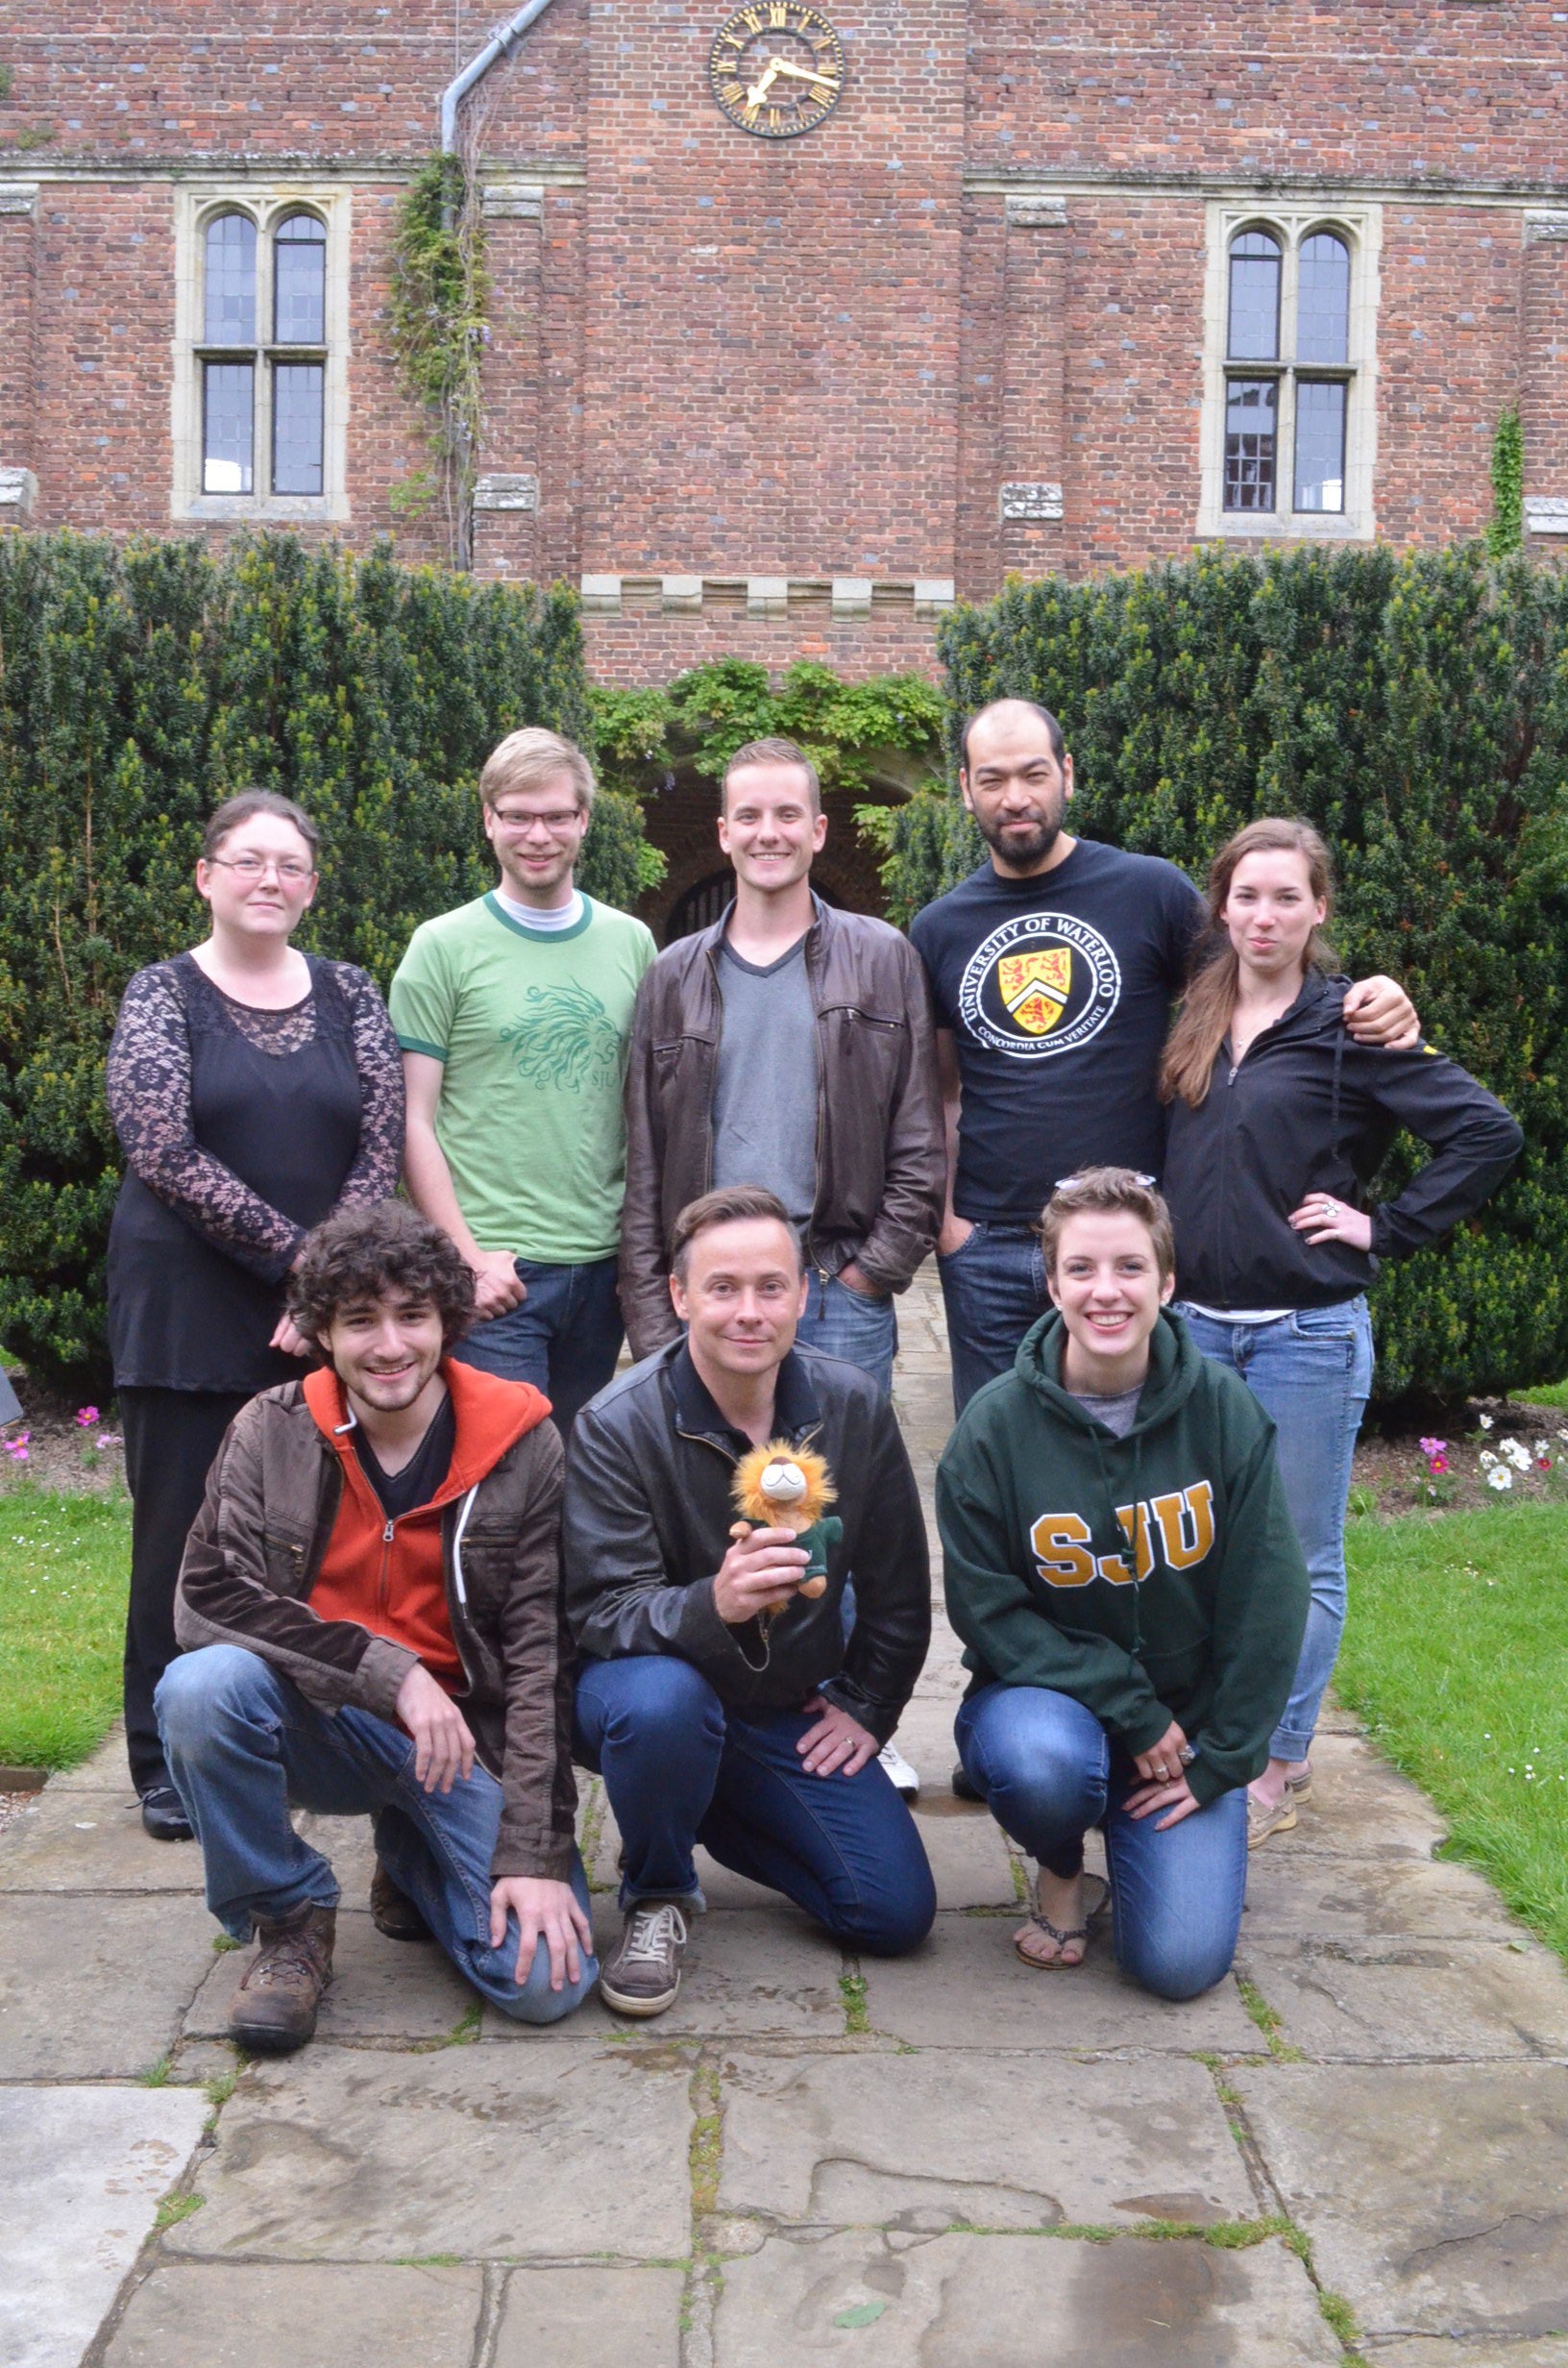 2014 experiential learning adventure students at Herstmonceux Castle, East Sussex, UK